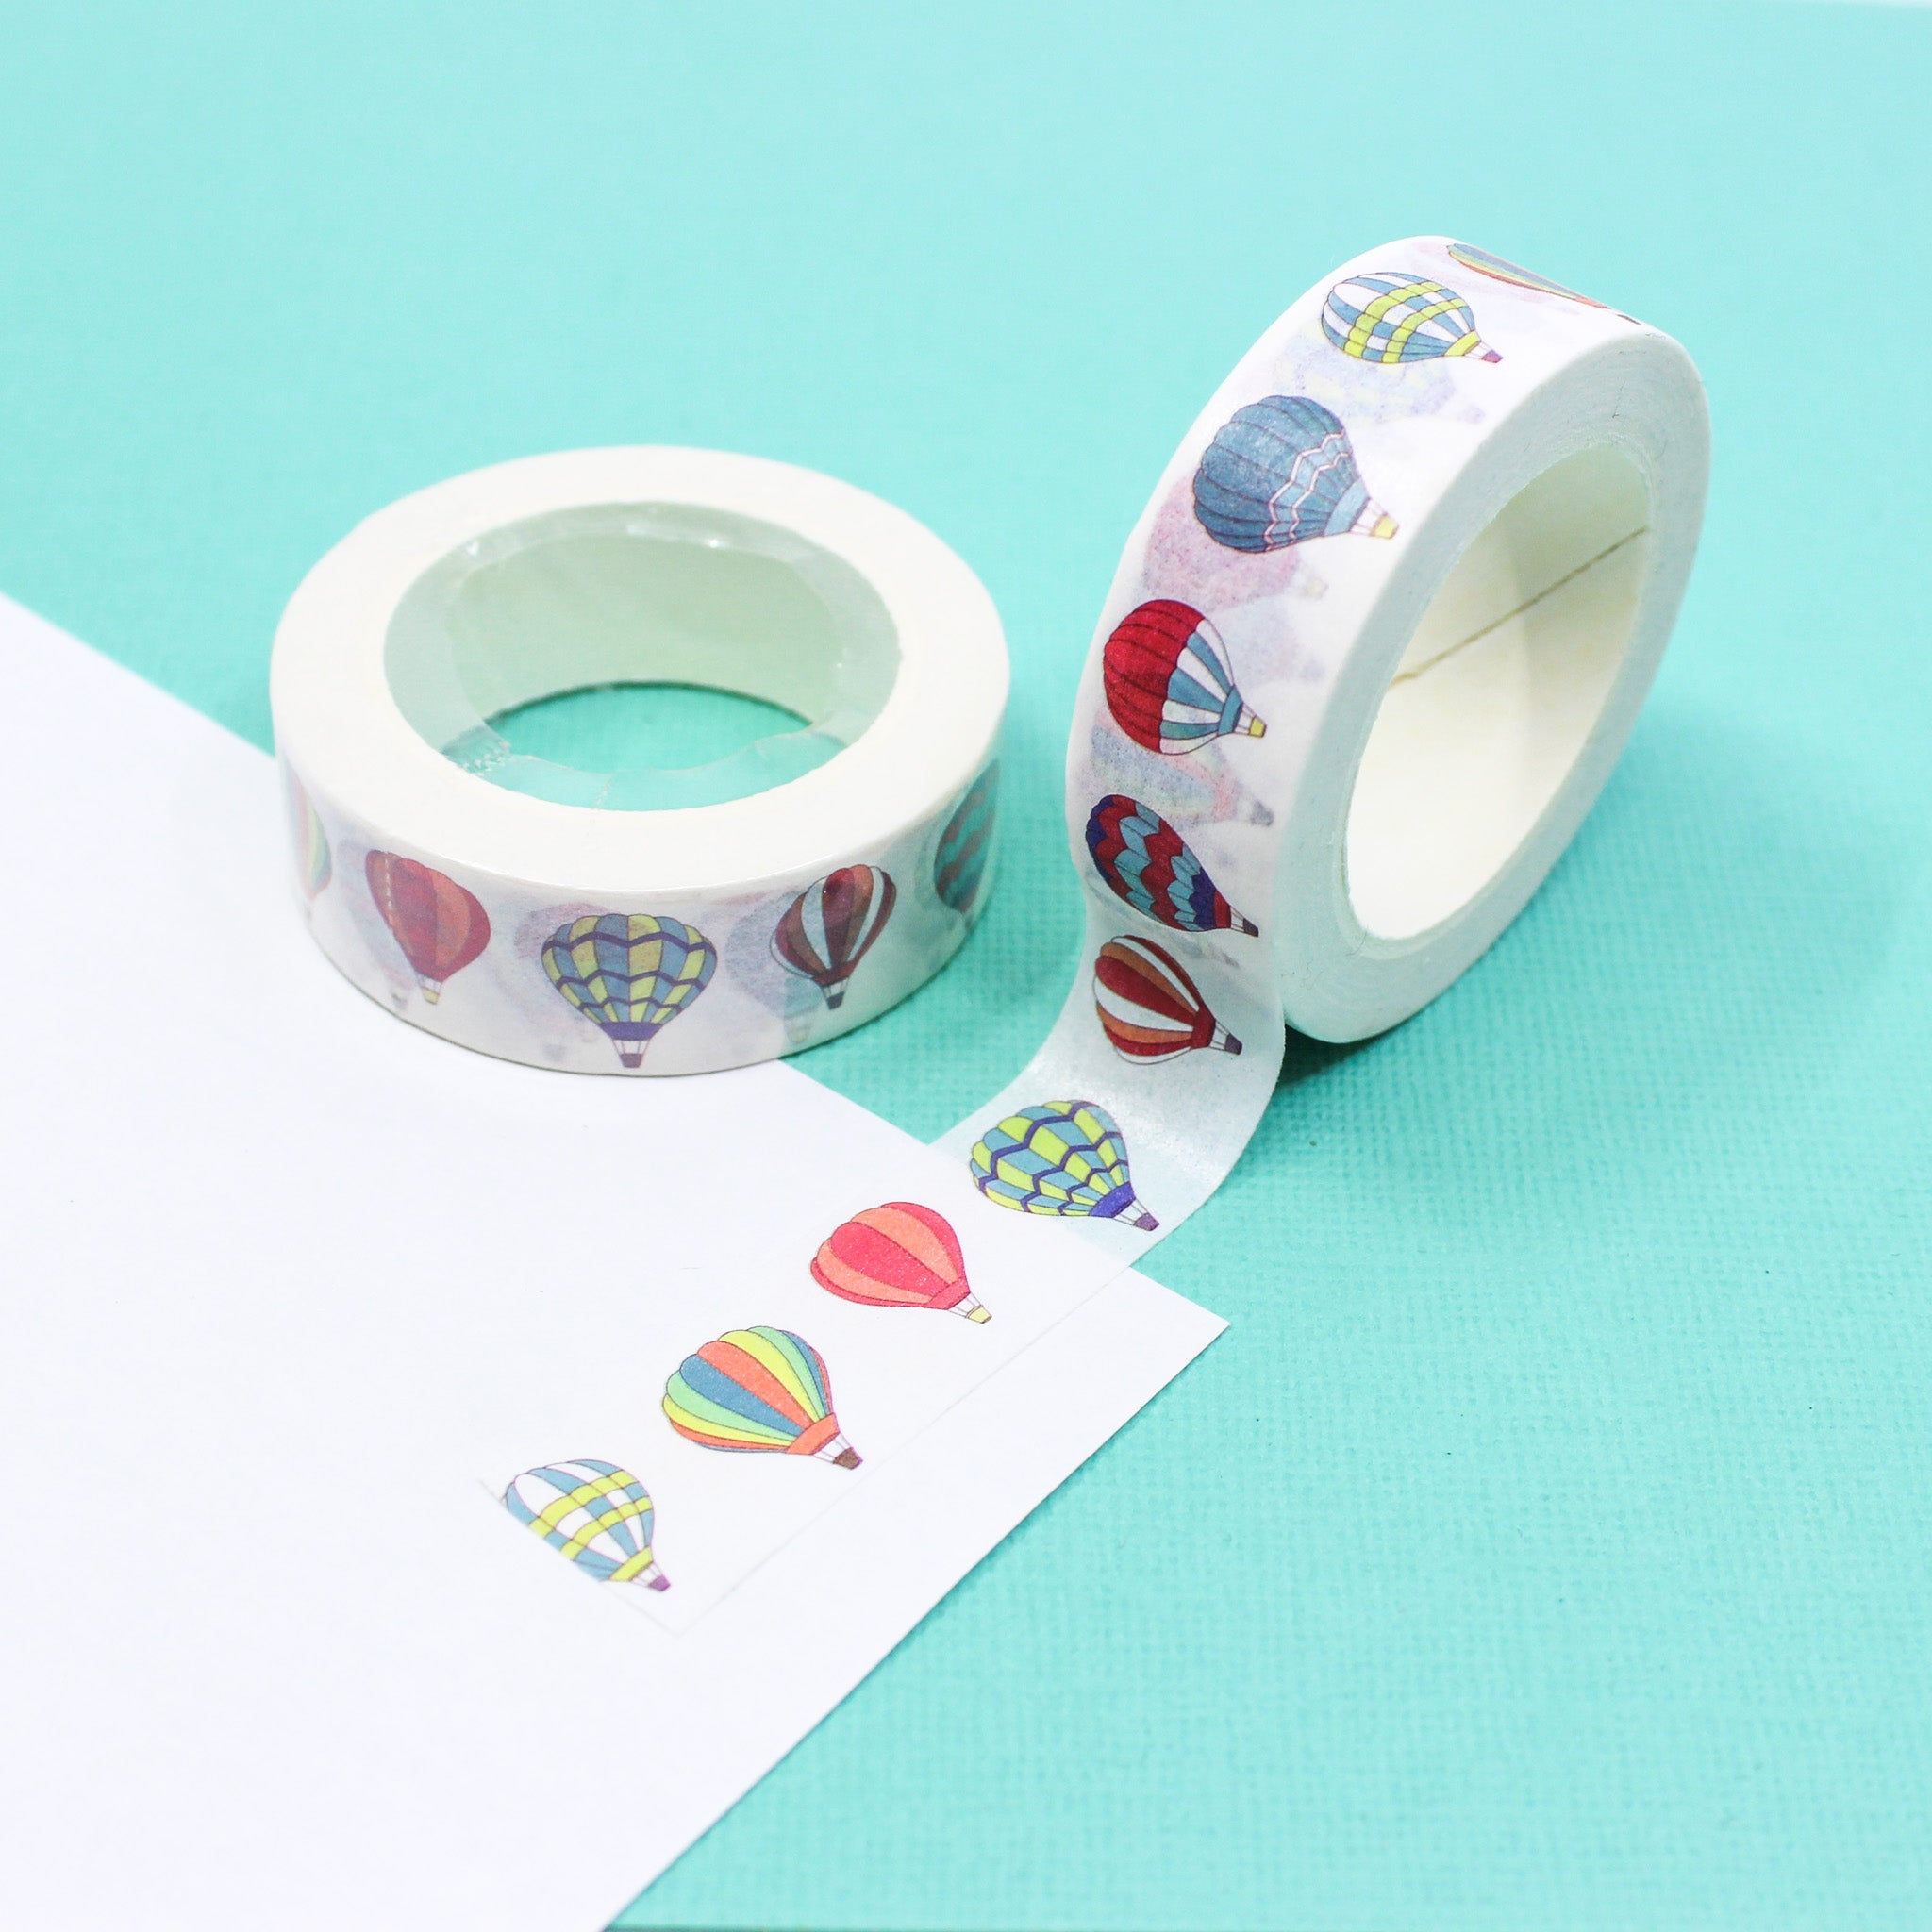 This a collections of colorful air balloons pattern washi tape from BBB Supplies Craft Shop